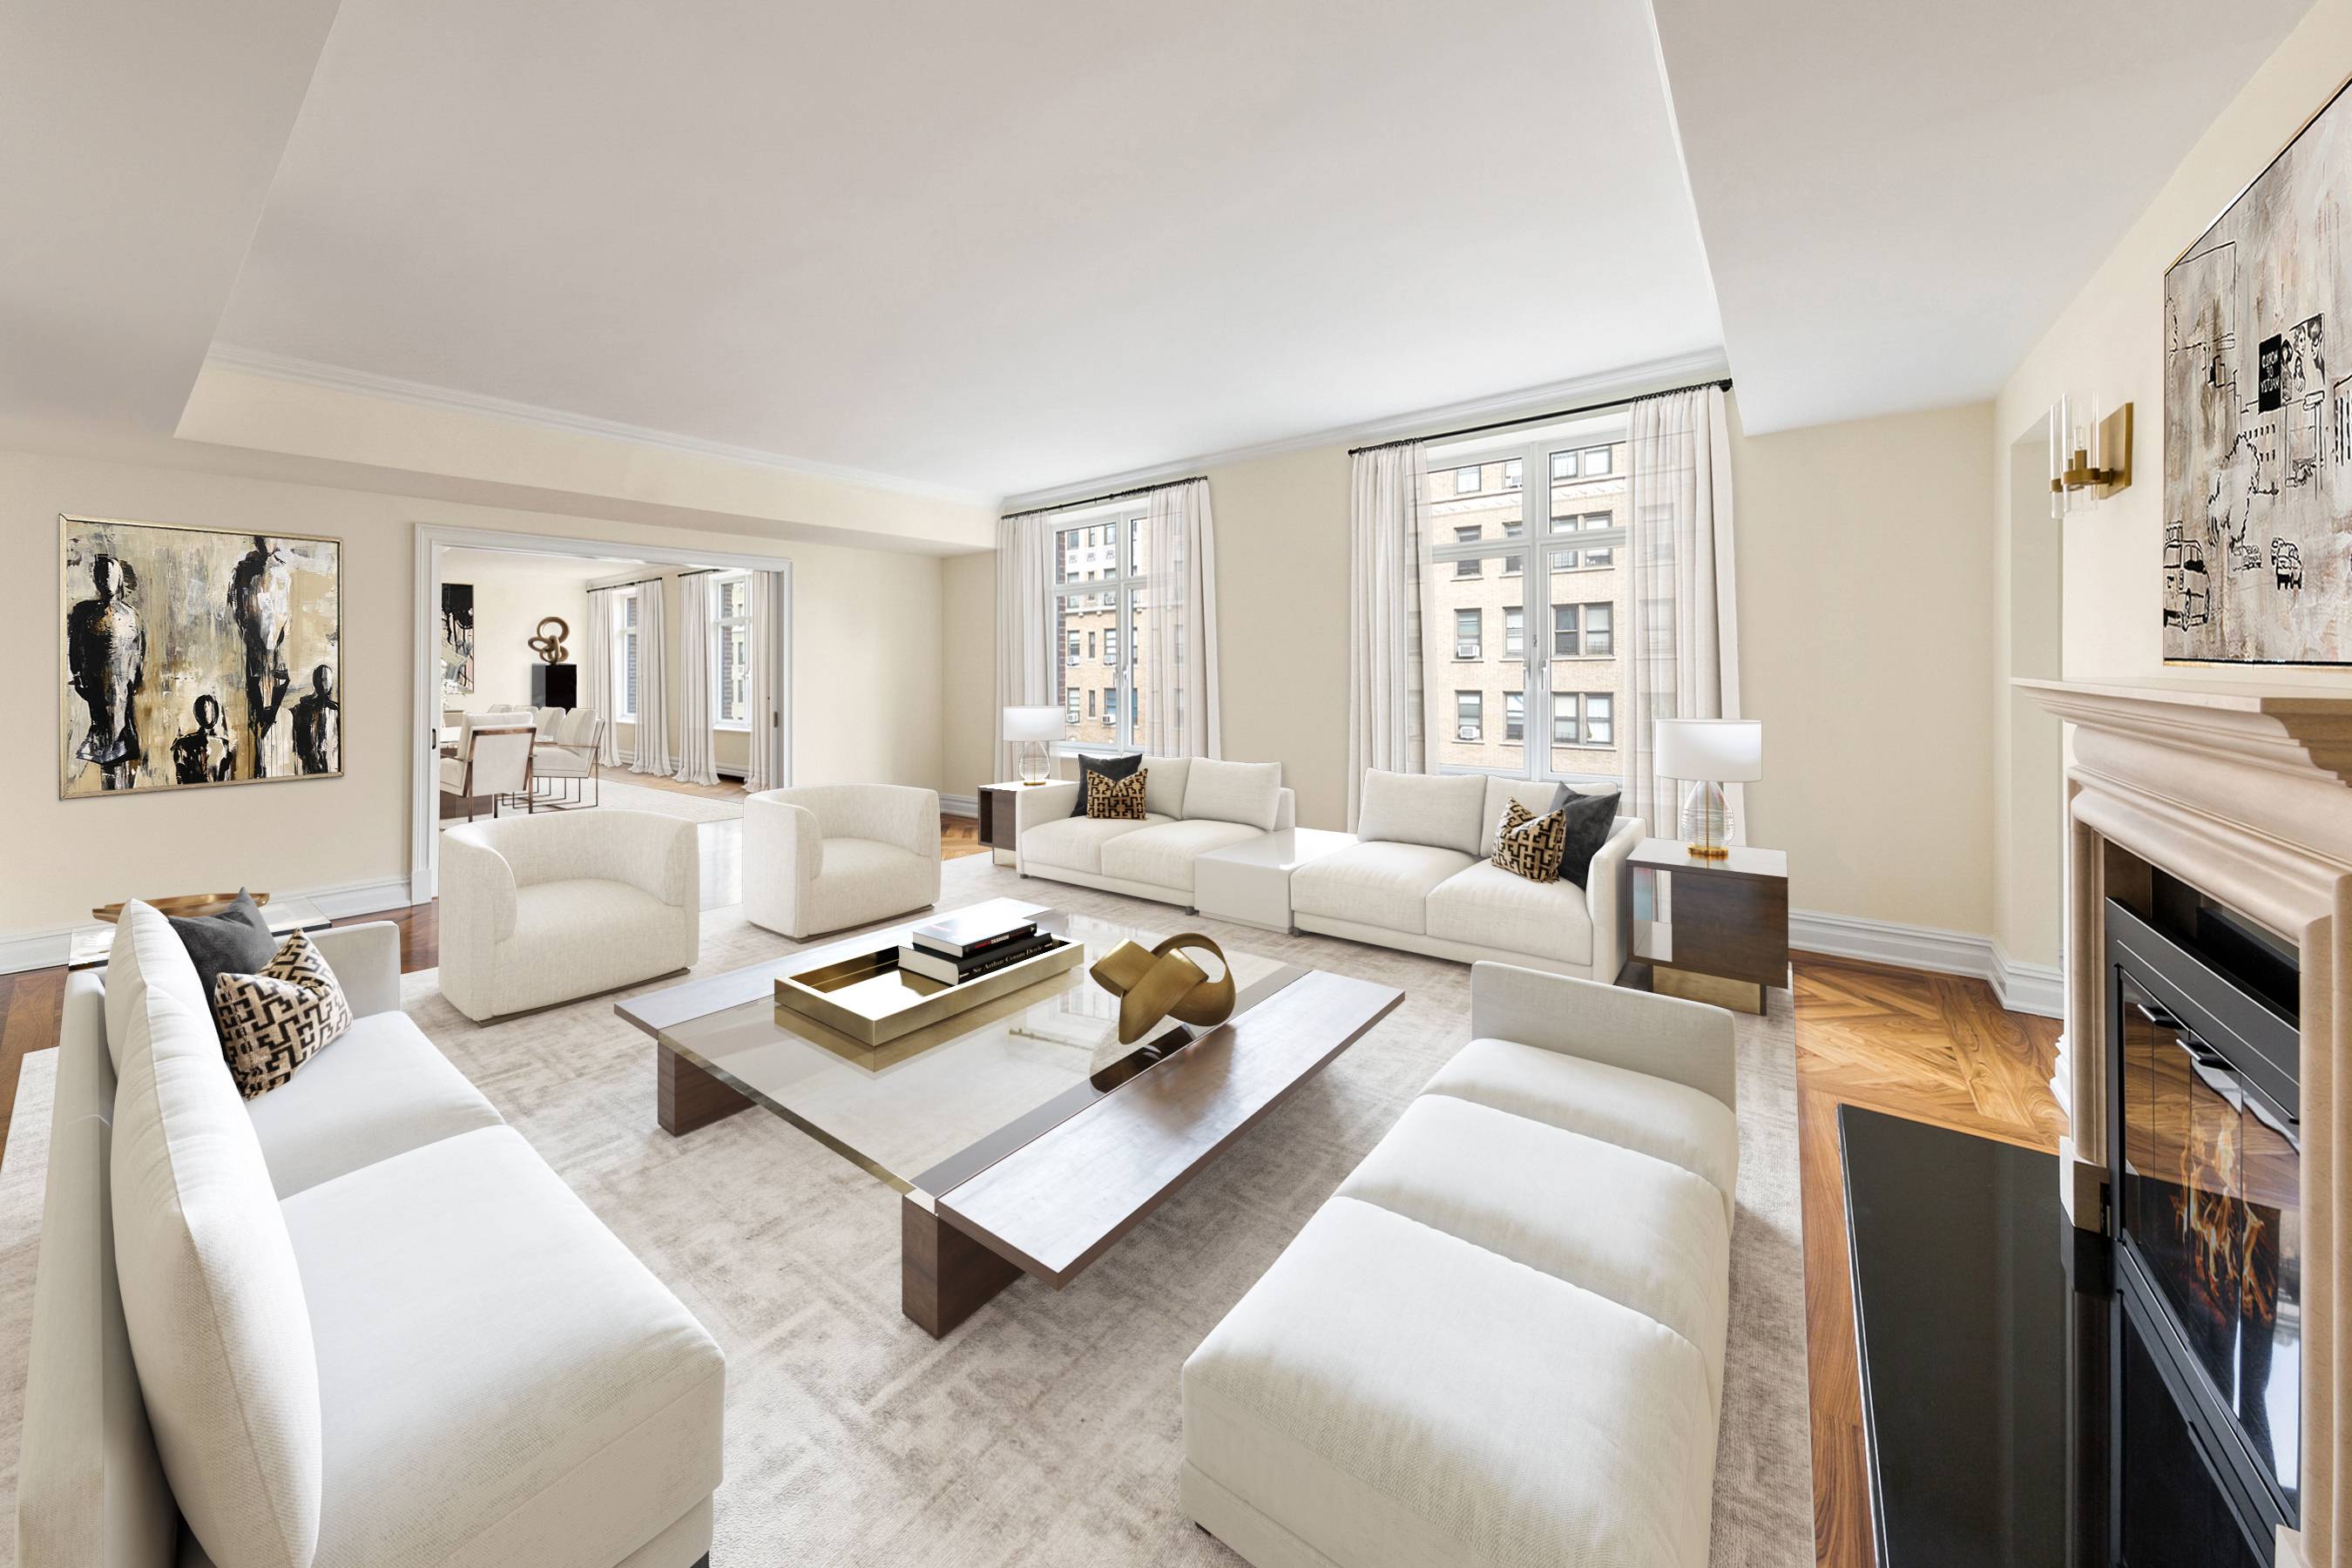 Sprawling over 8400 square feet the superior, private, full floor residence at 535 West End Avenue is a rare opportunity to live in the city but enjoy the security, comfort, ...